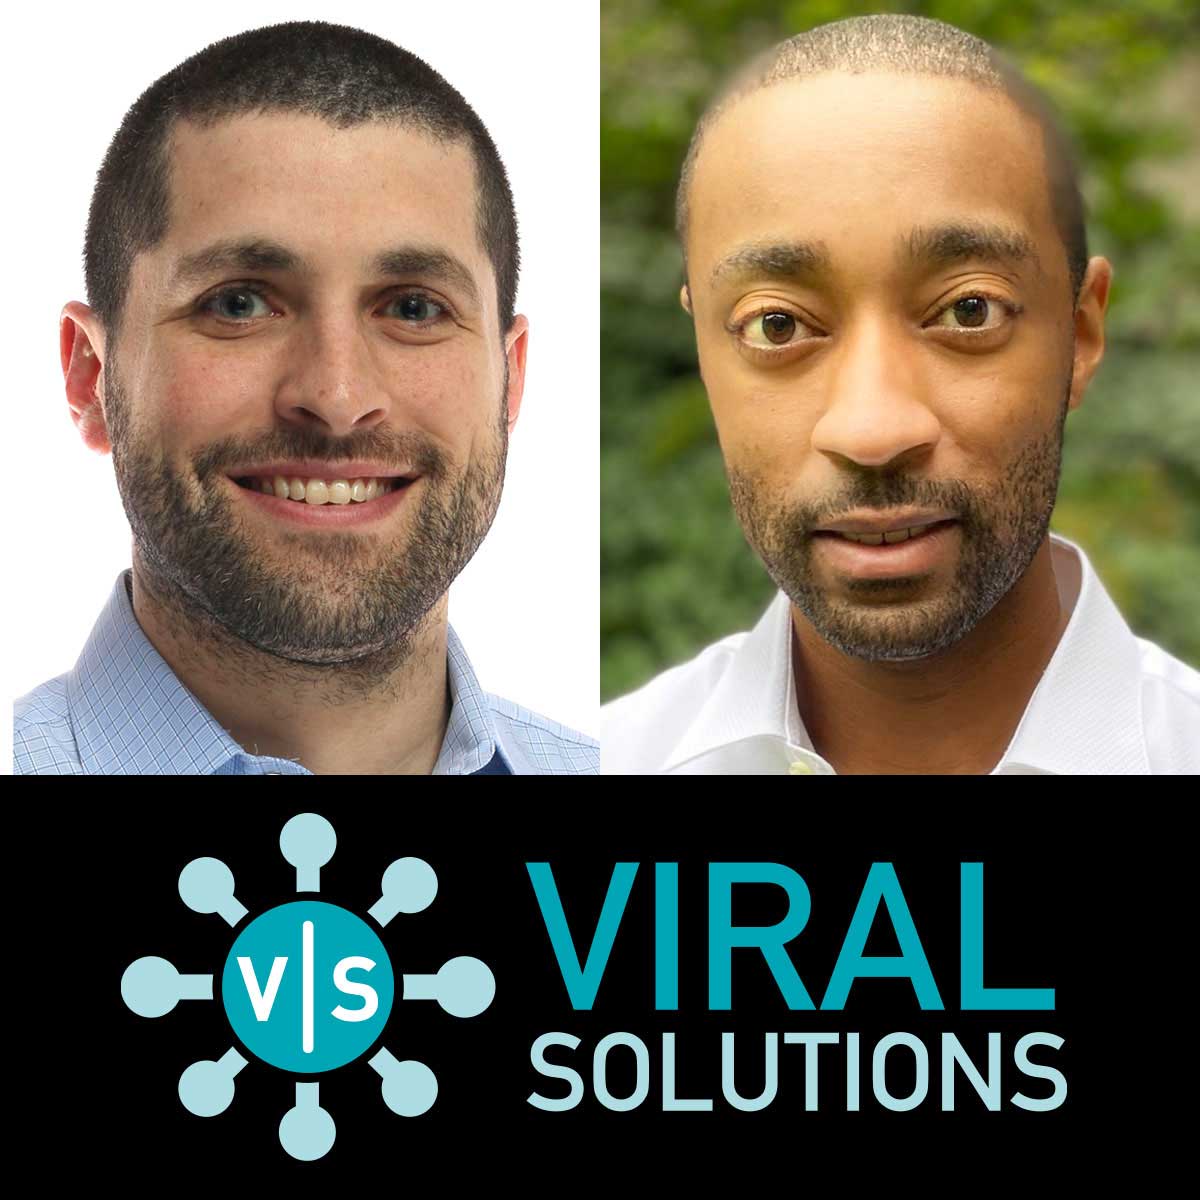 Dr. Benjamin Lefkove and Ron Sanders, founders of Viral Solutions